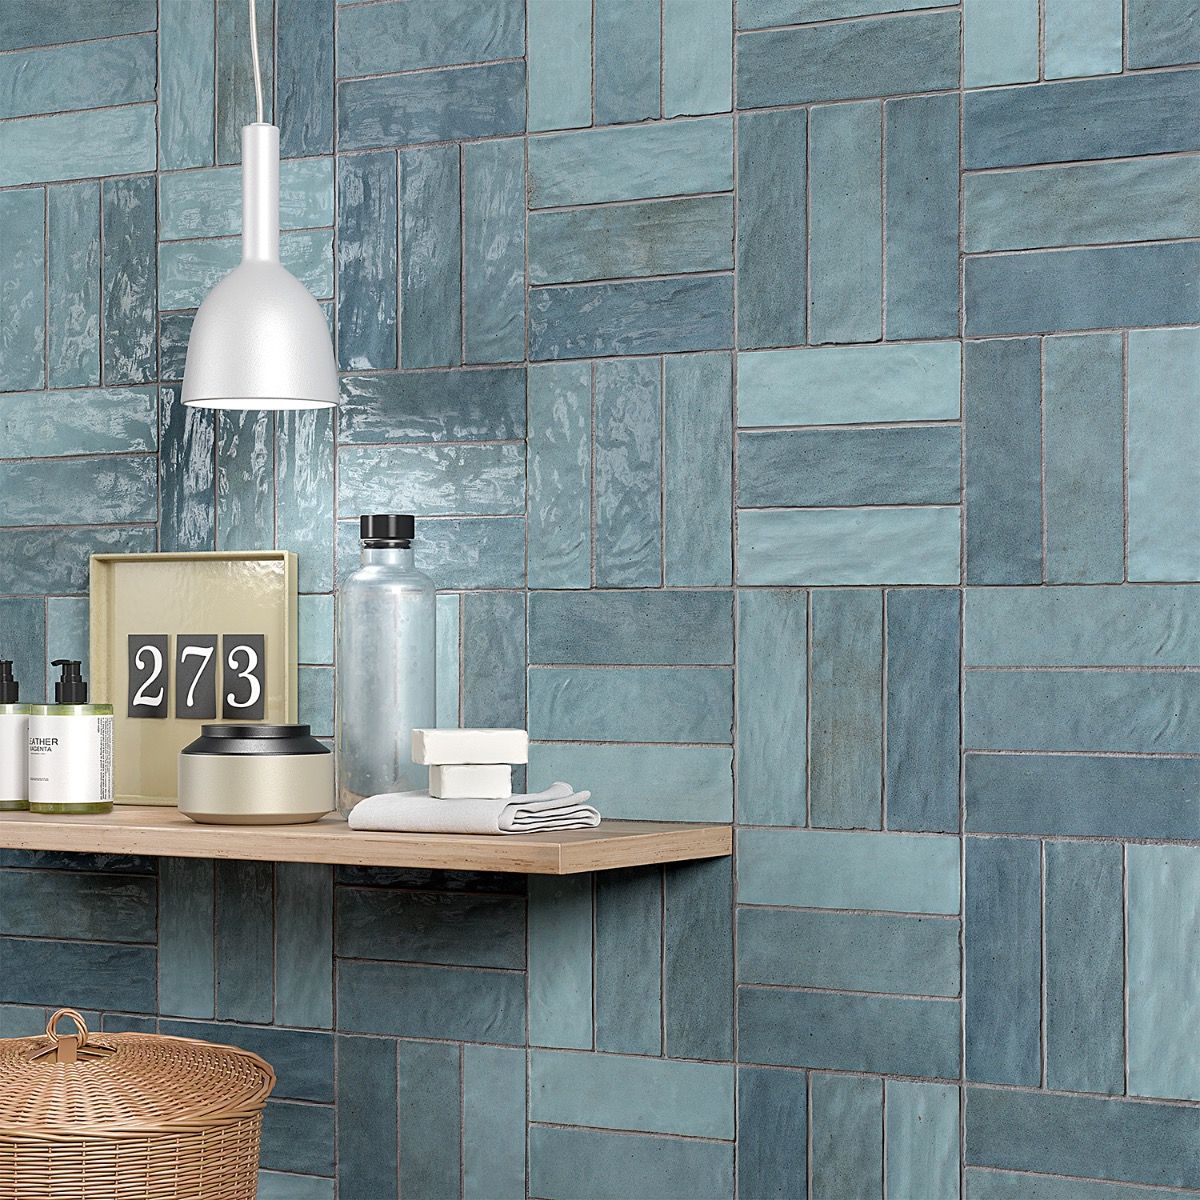 Tile-Ready to go bold with tile?